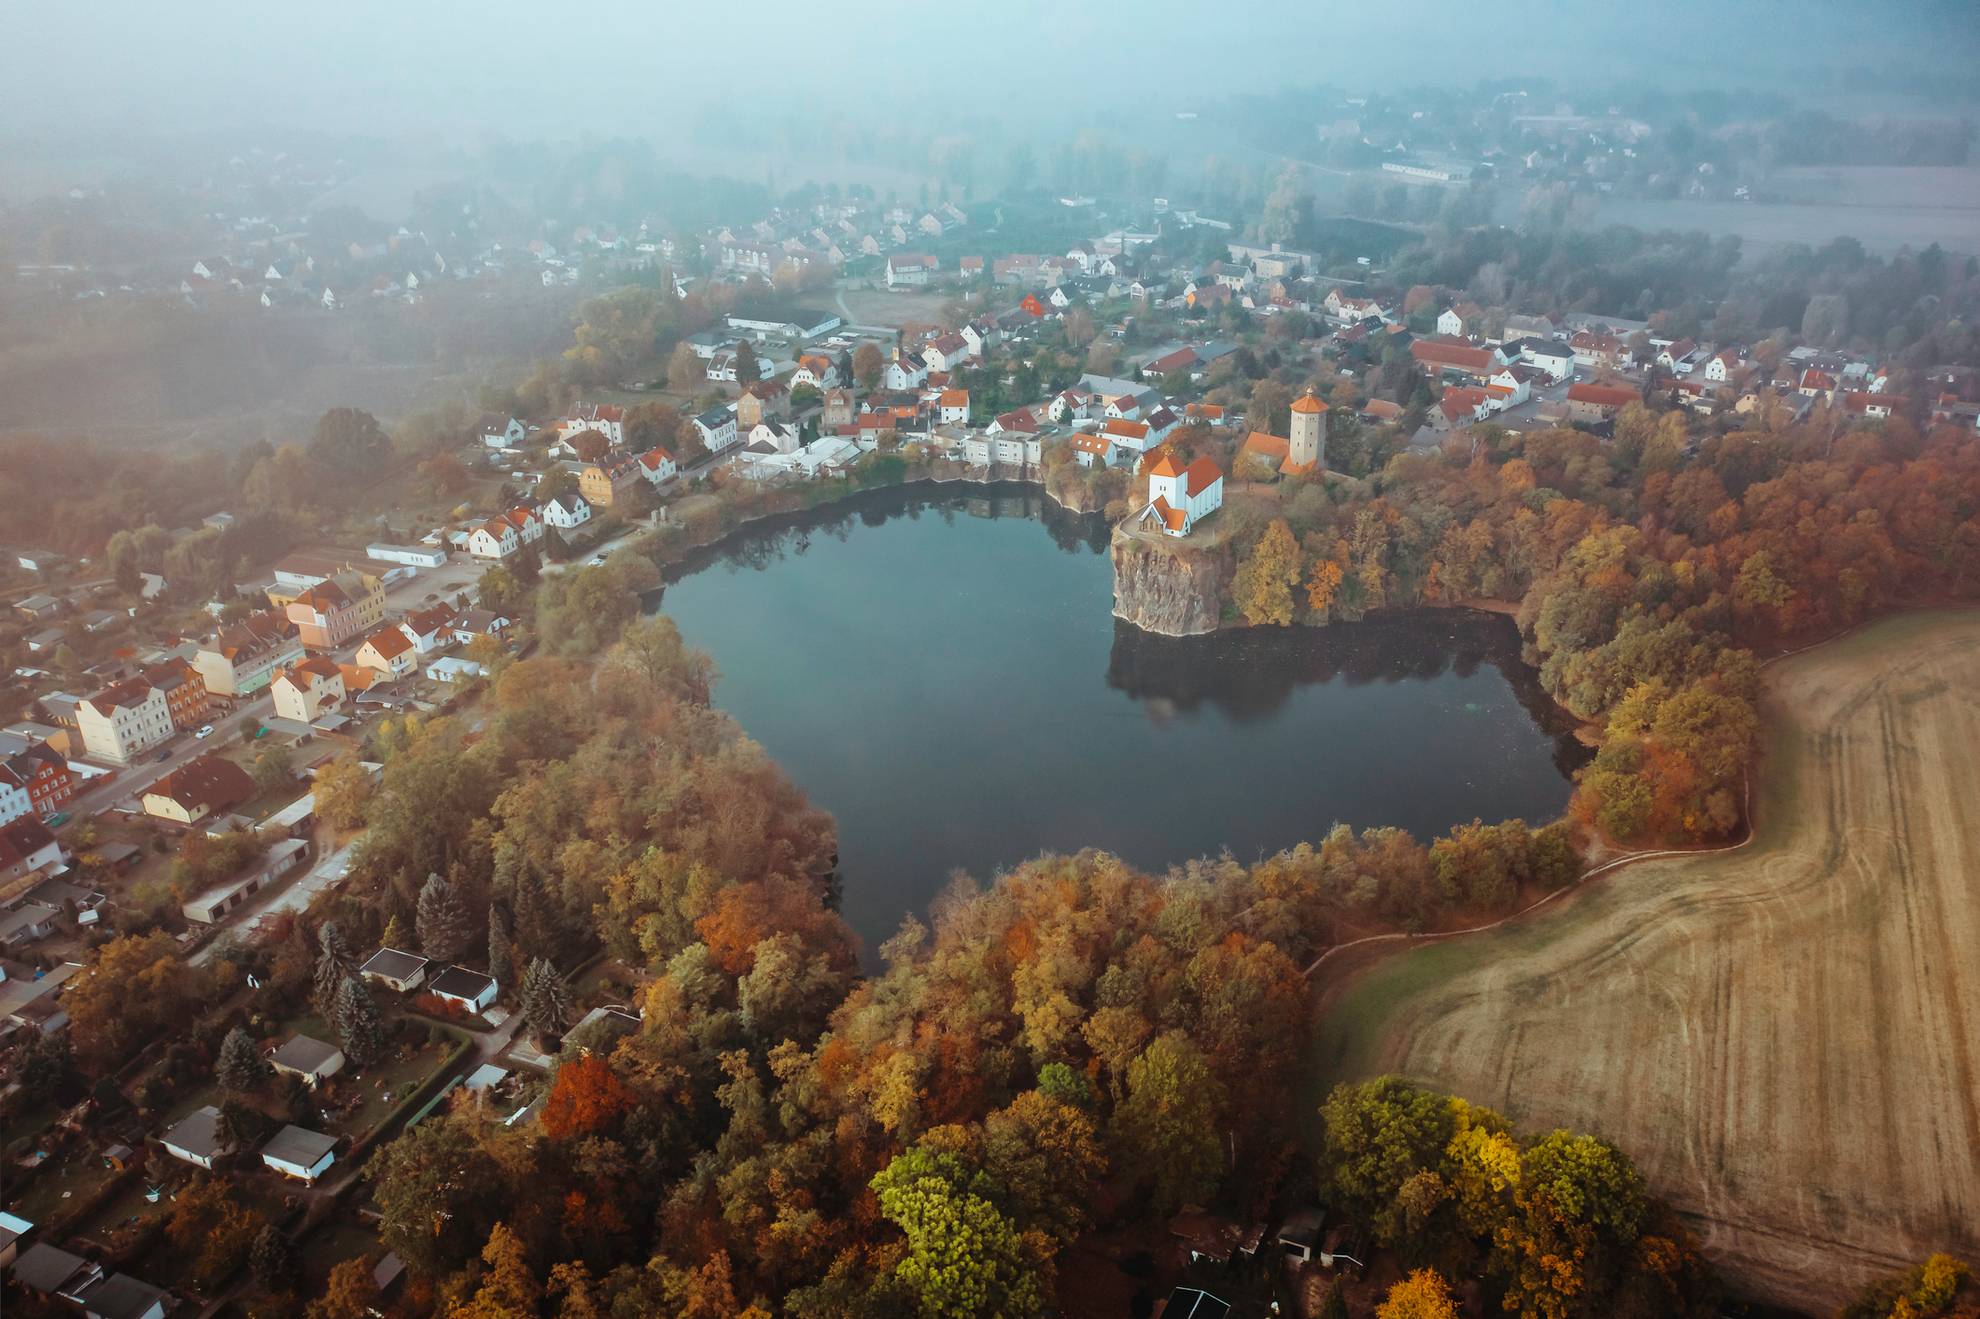 A heart shaped lake in Germany